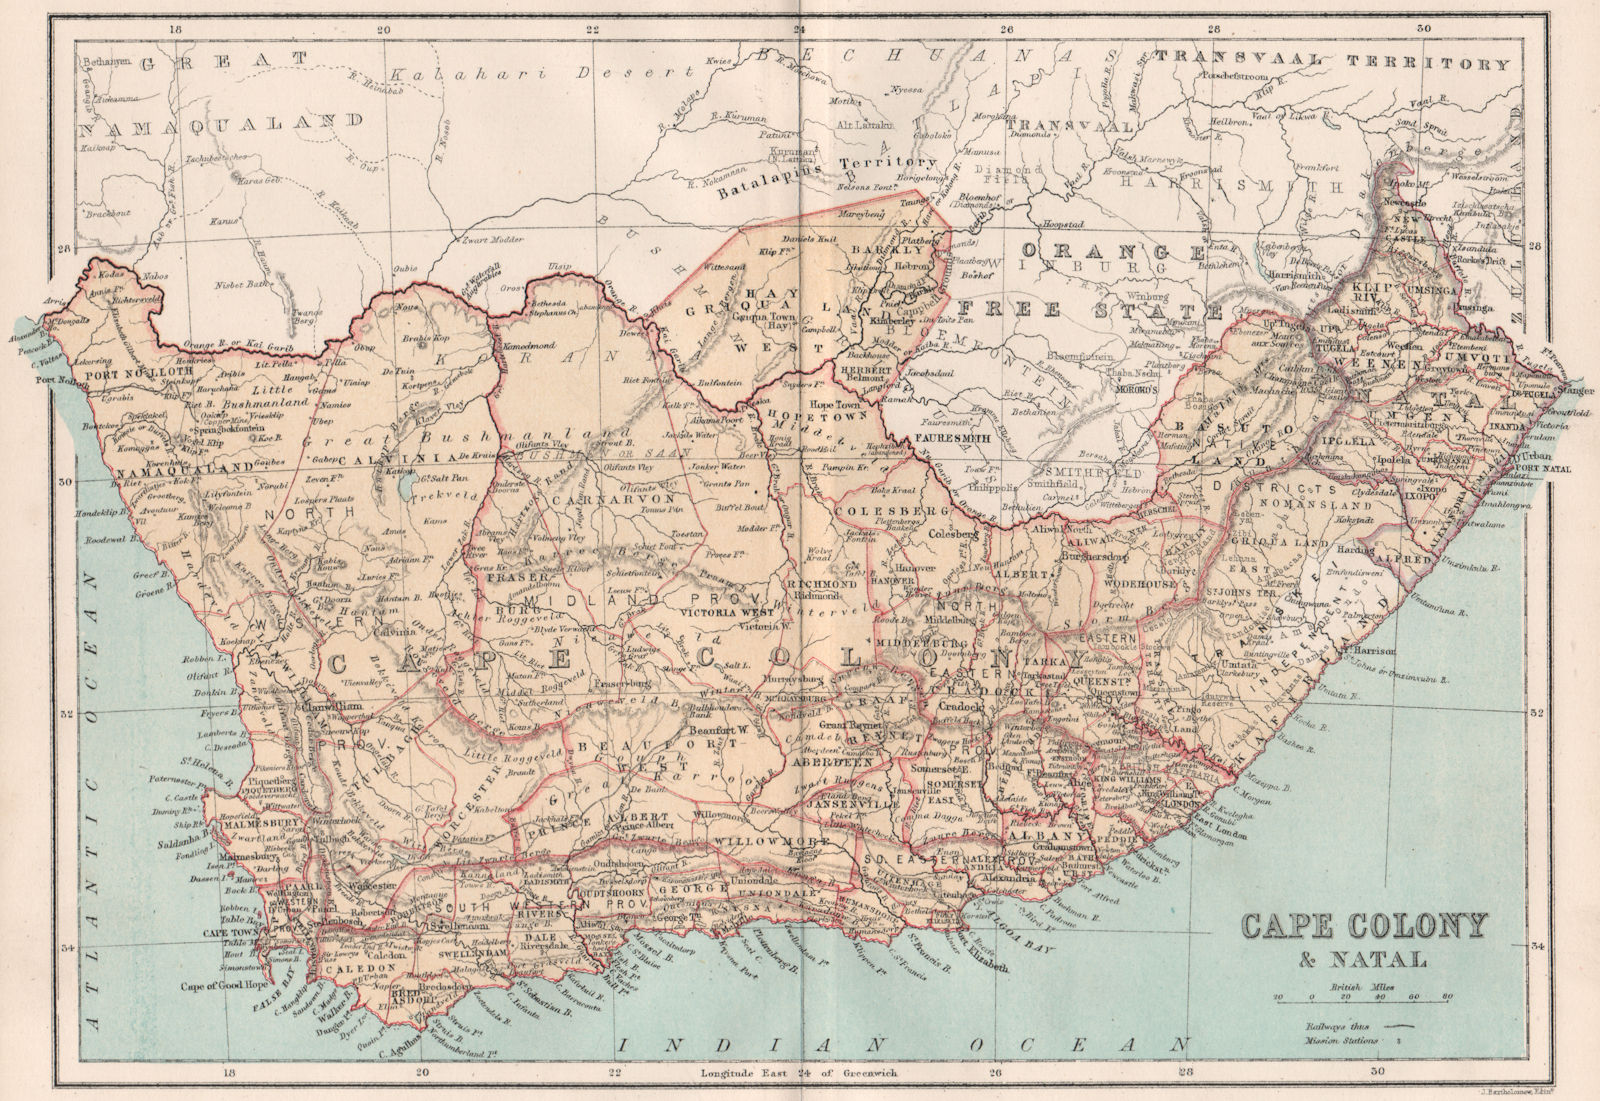 Cape Colony & Natal. South Africa. BARTHOLOMEW 1886 old antique map plan chart